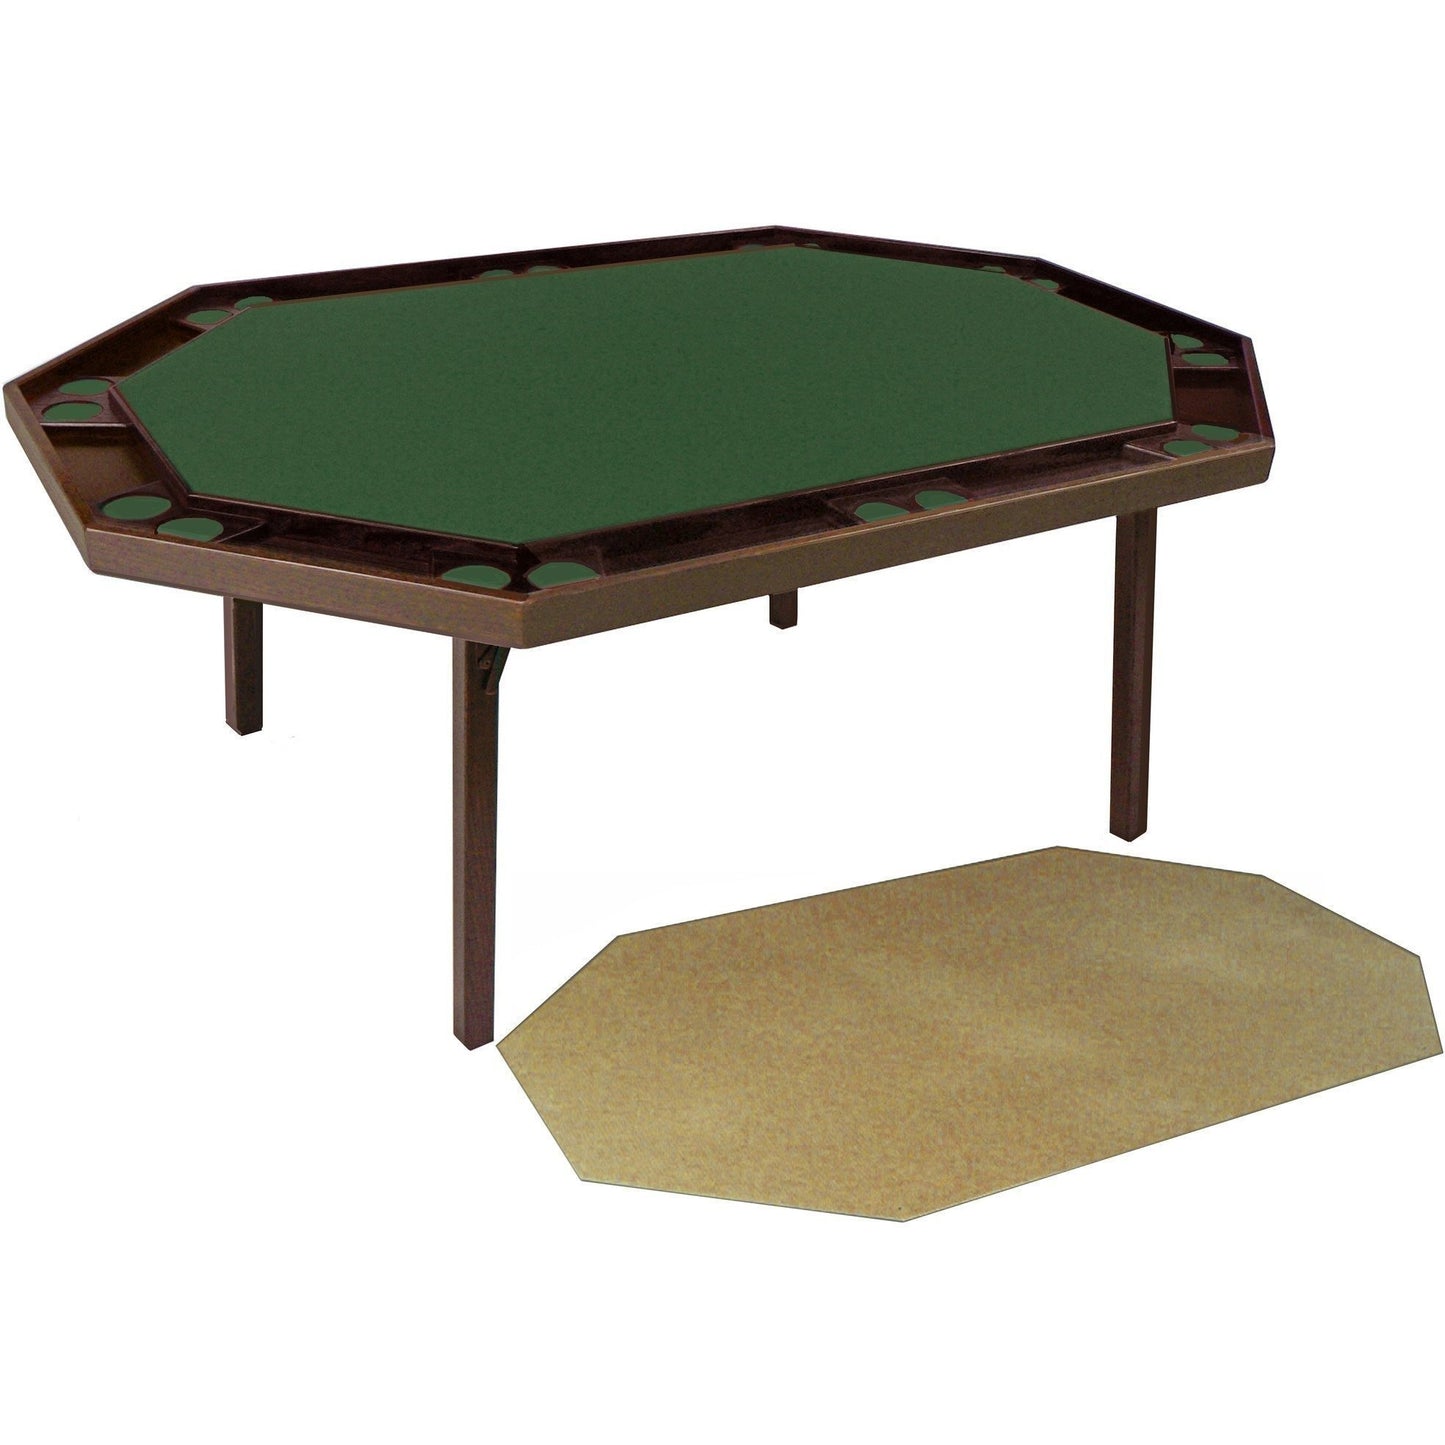 Kestell Deluxe Oak Folding Poker Table with Dining Top 10 Person - Just Poker Tables